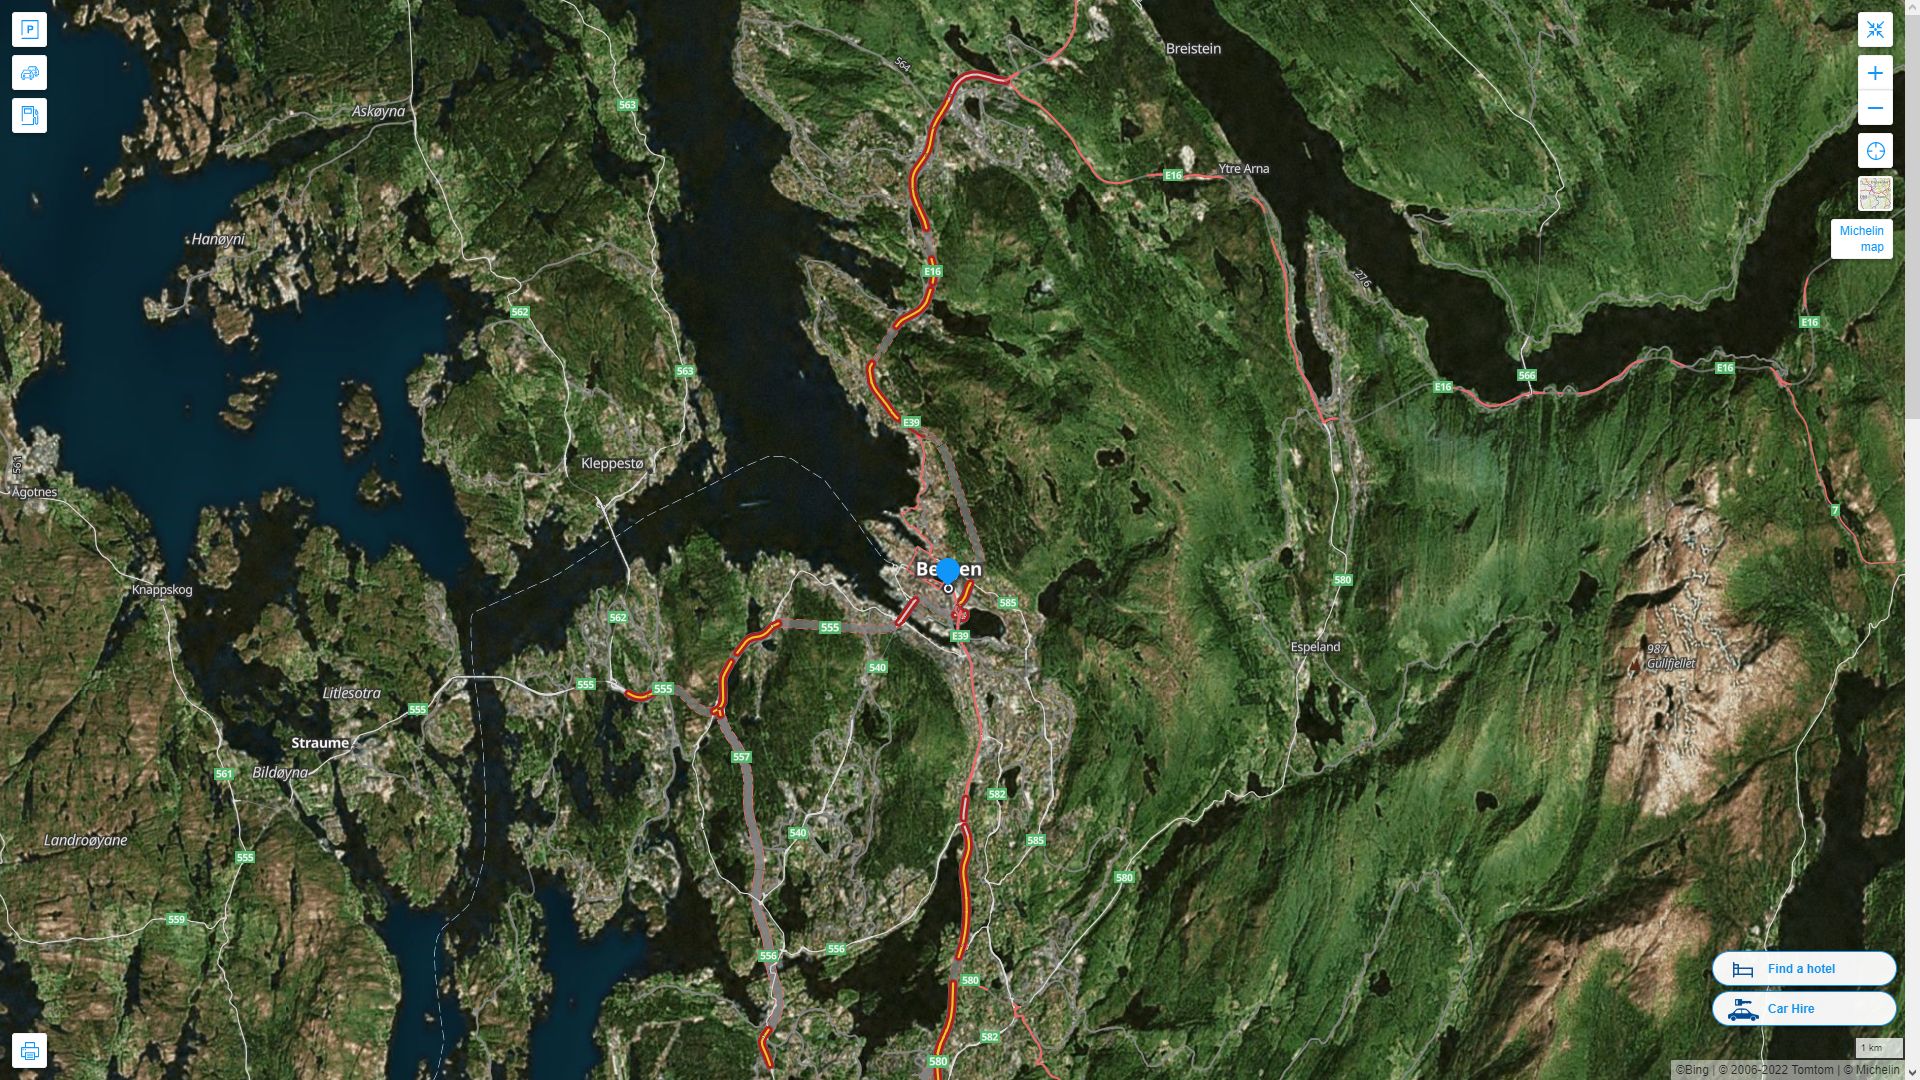 Bergen Highway and Road Map with Satellite View